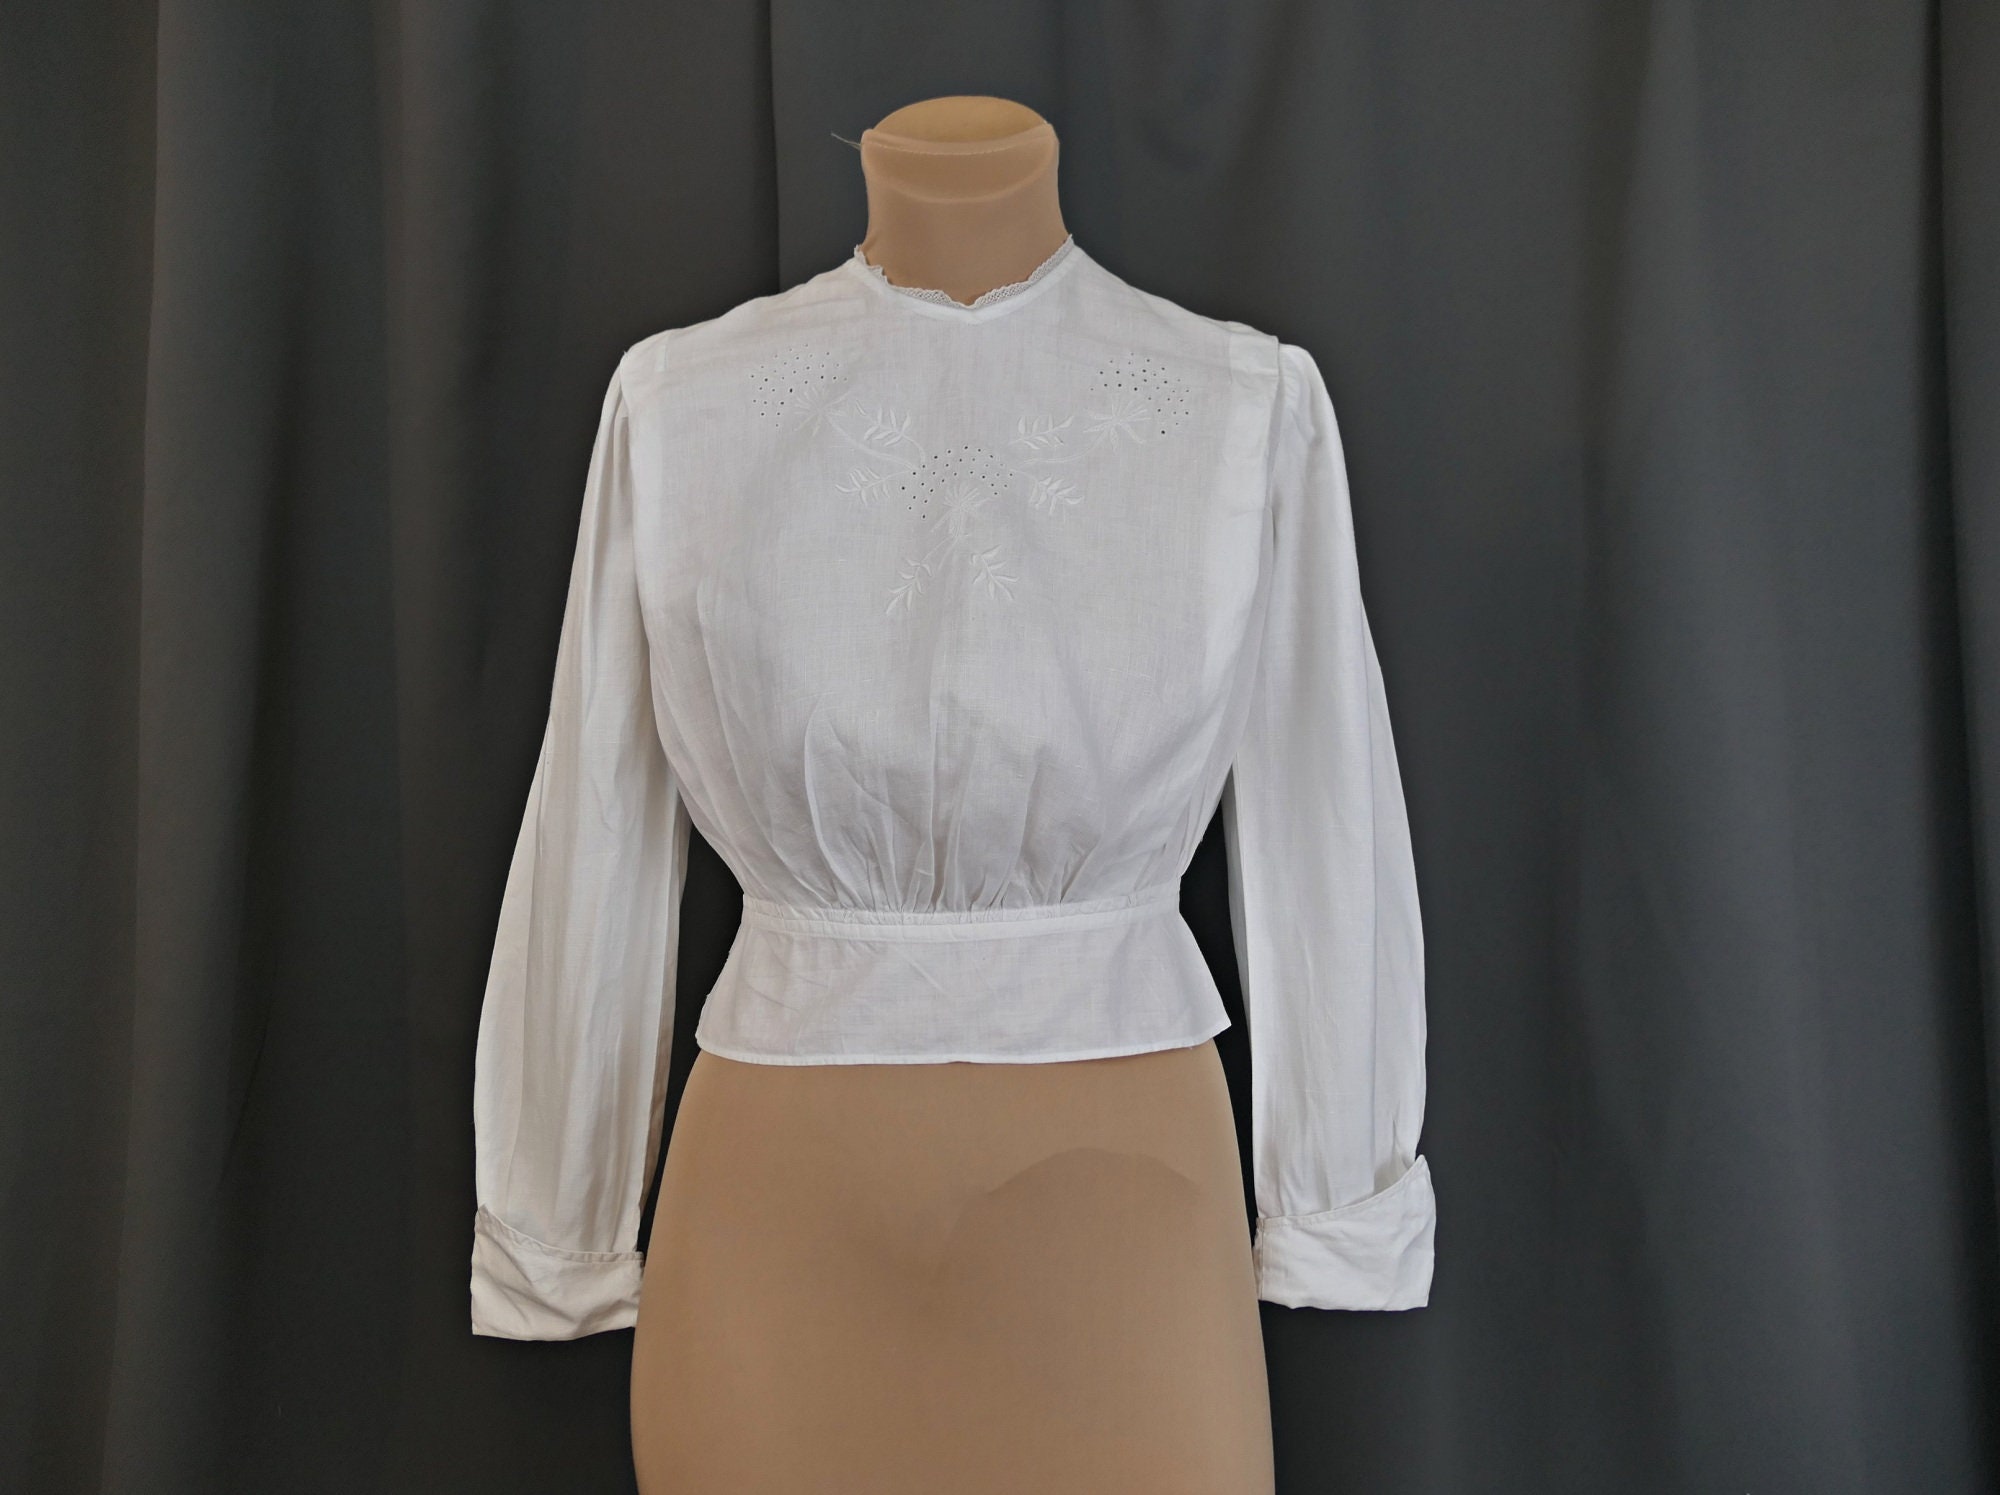 Vintage Edwardian Blouse, 32 bust, Embroidered White Cotton Lace